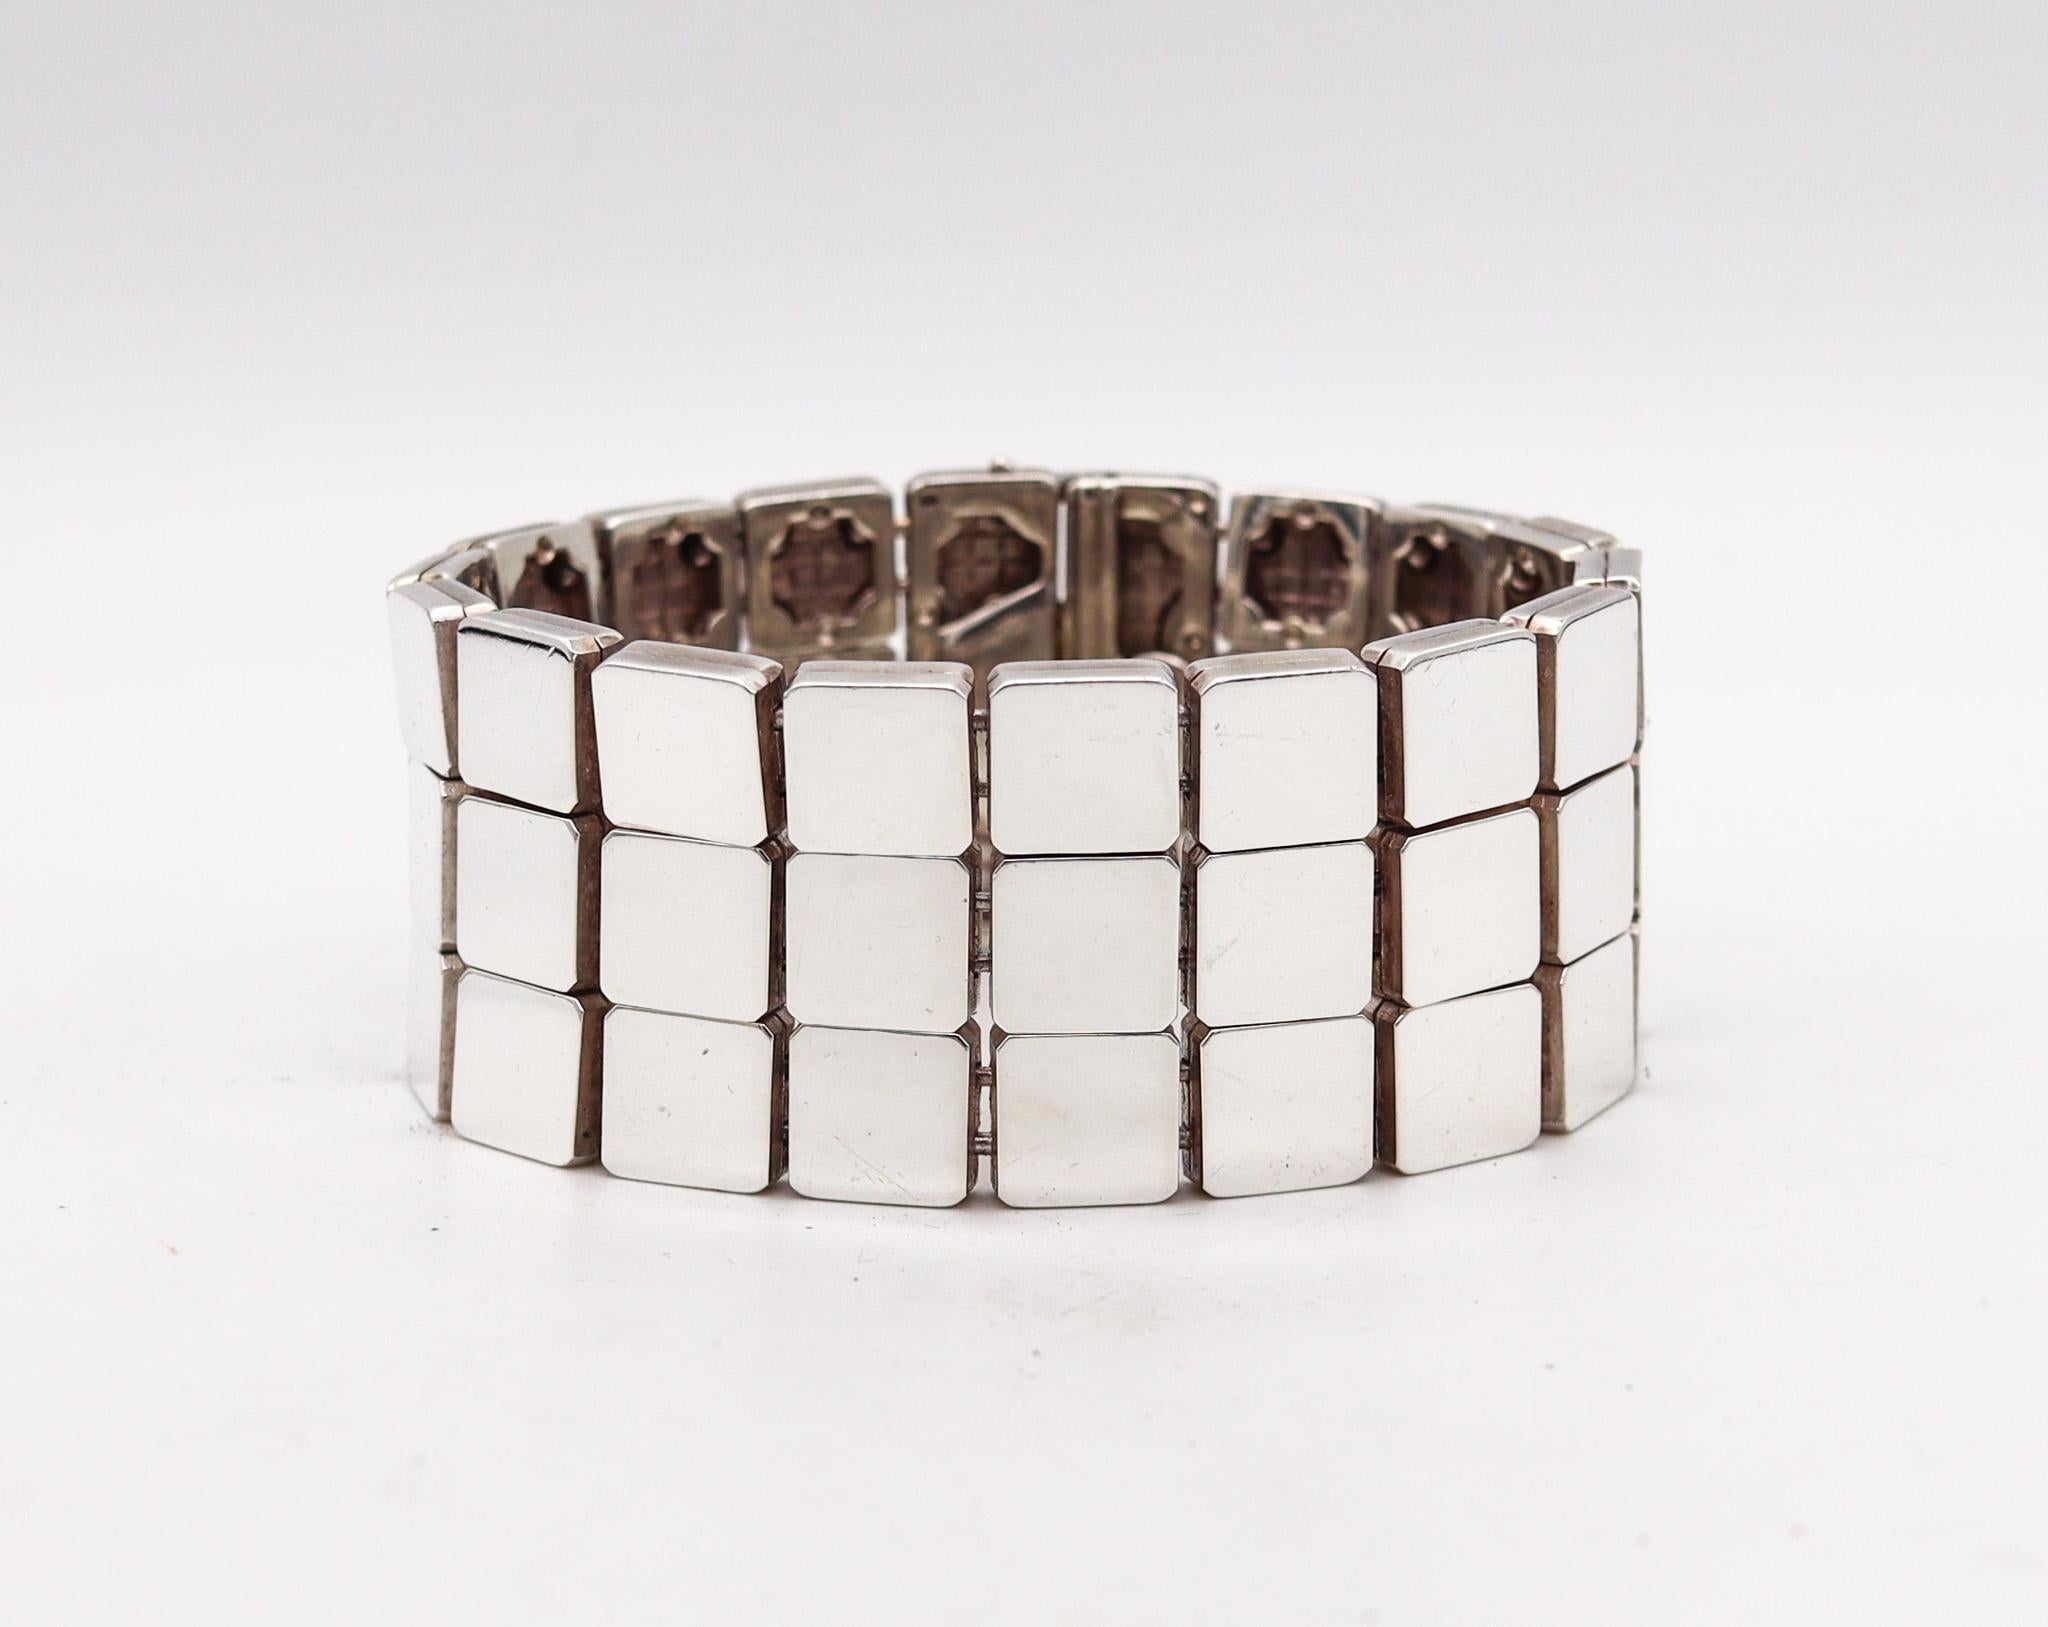 Geometric bracelet designed by Tiffany & Co.

This is a very rare architectural bracelet, created by the Tiffany Studios, back in the 2002. Constructed by fifty four square elements divided in three rows carefully crafted by artisans in solid